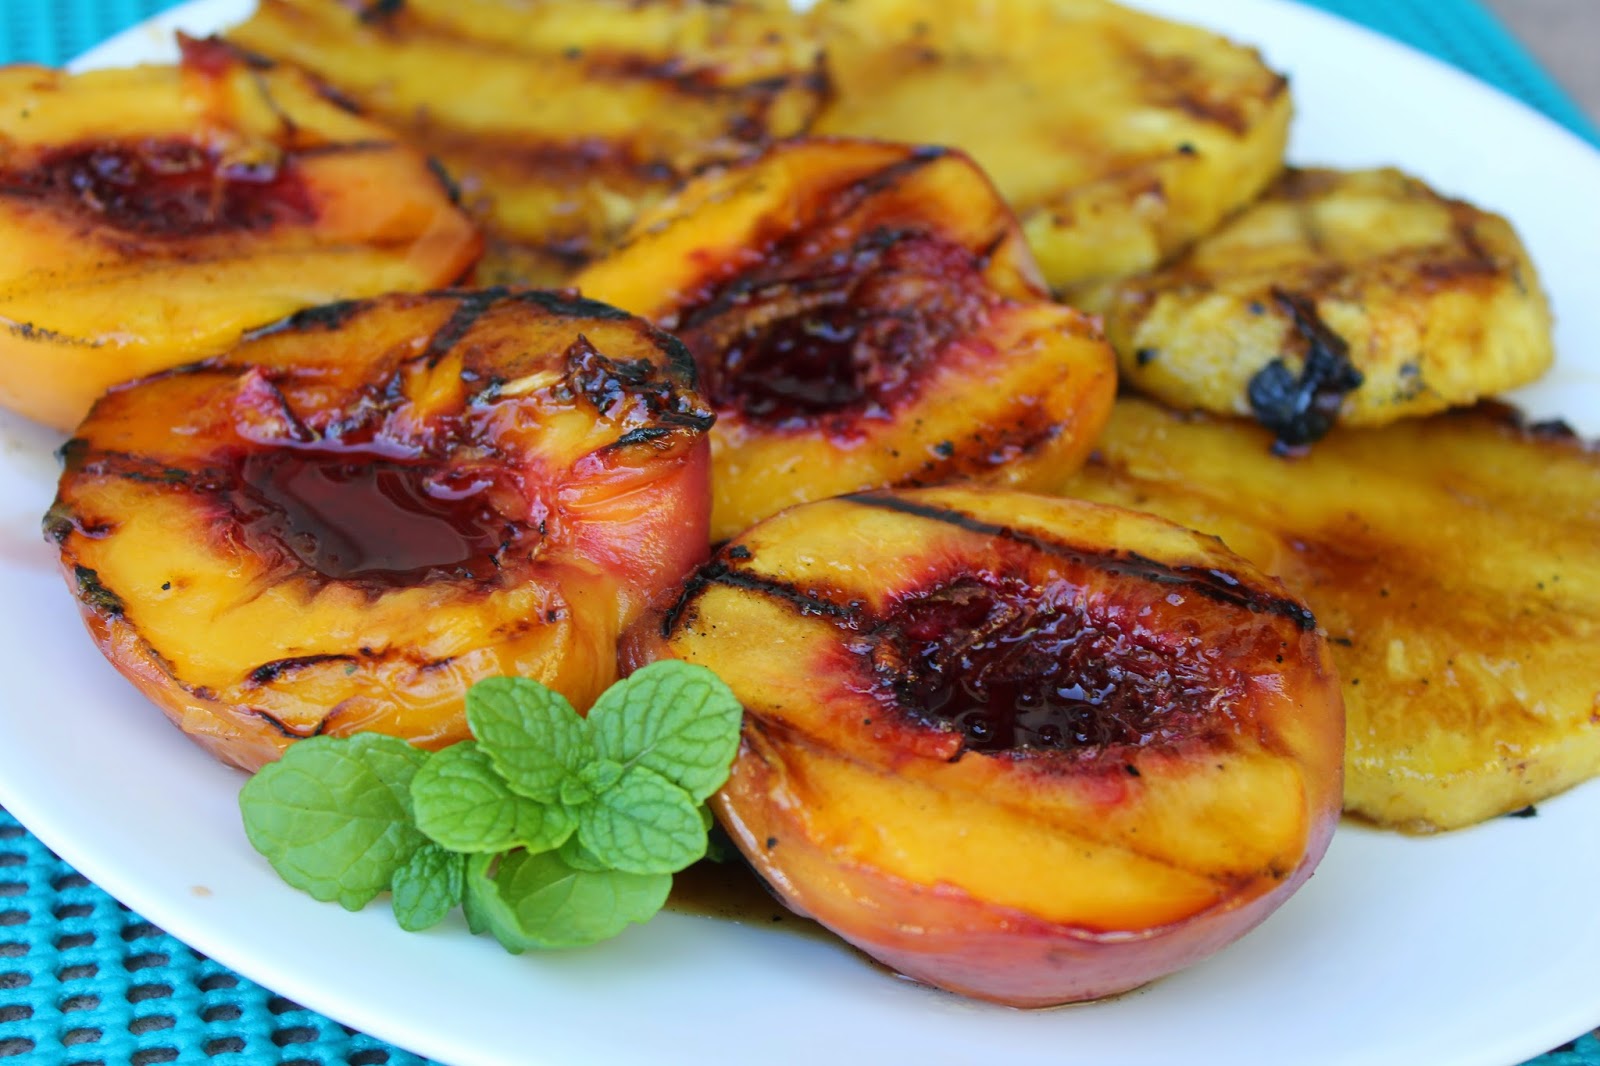 Recipe: Healthy, Recipe: Fruit, Recipe: Side Dishes, Recipe: Dessert, grilled fruit, marinated grilled pineapple, Grilled Peaches and Pineapple with Honey Lime Glaze, Deals to Meals